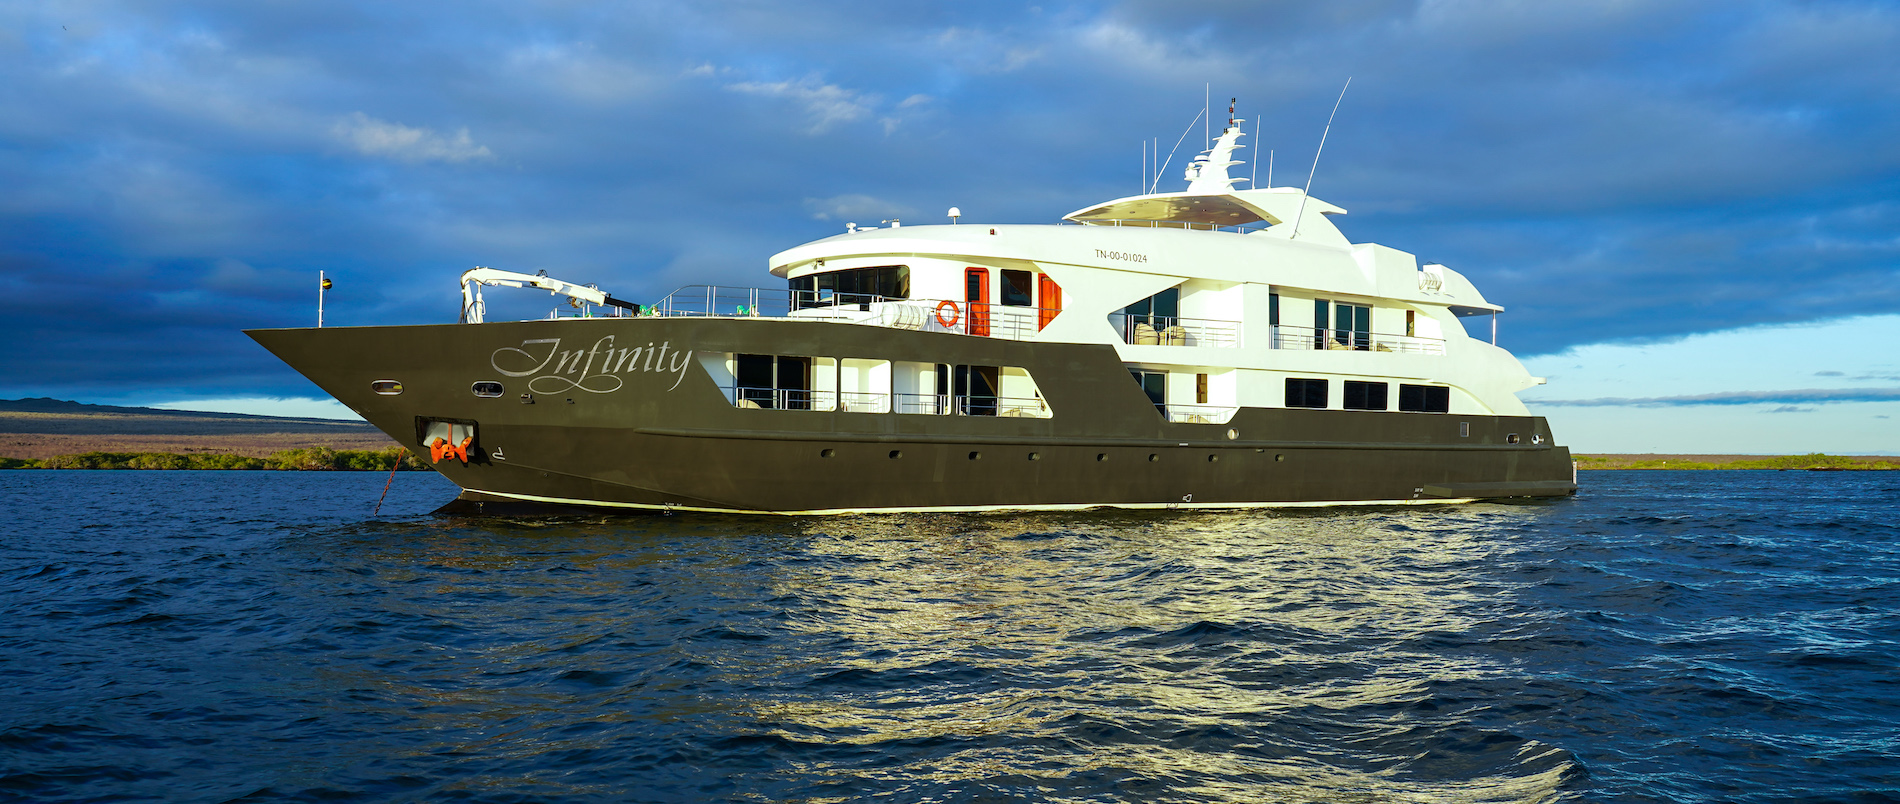 M/Y Infinity Galapagos Yacht